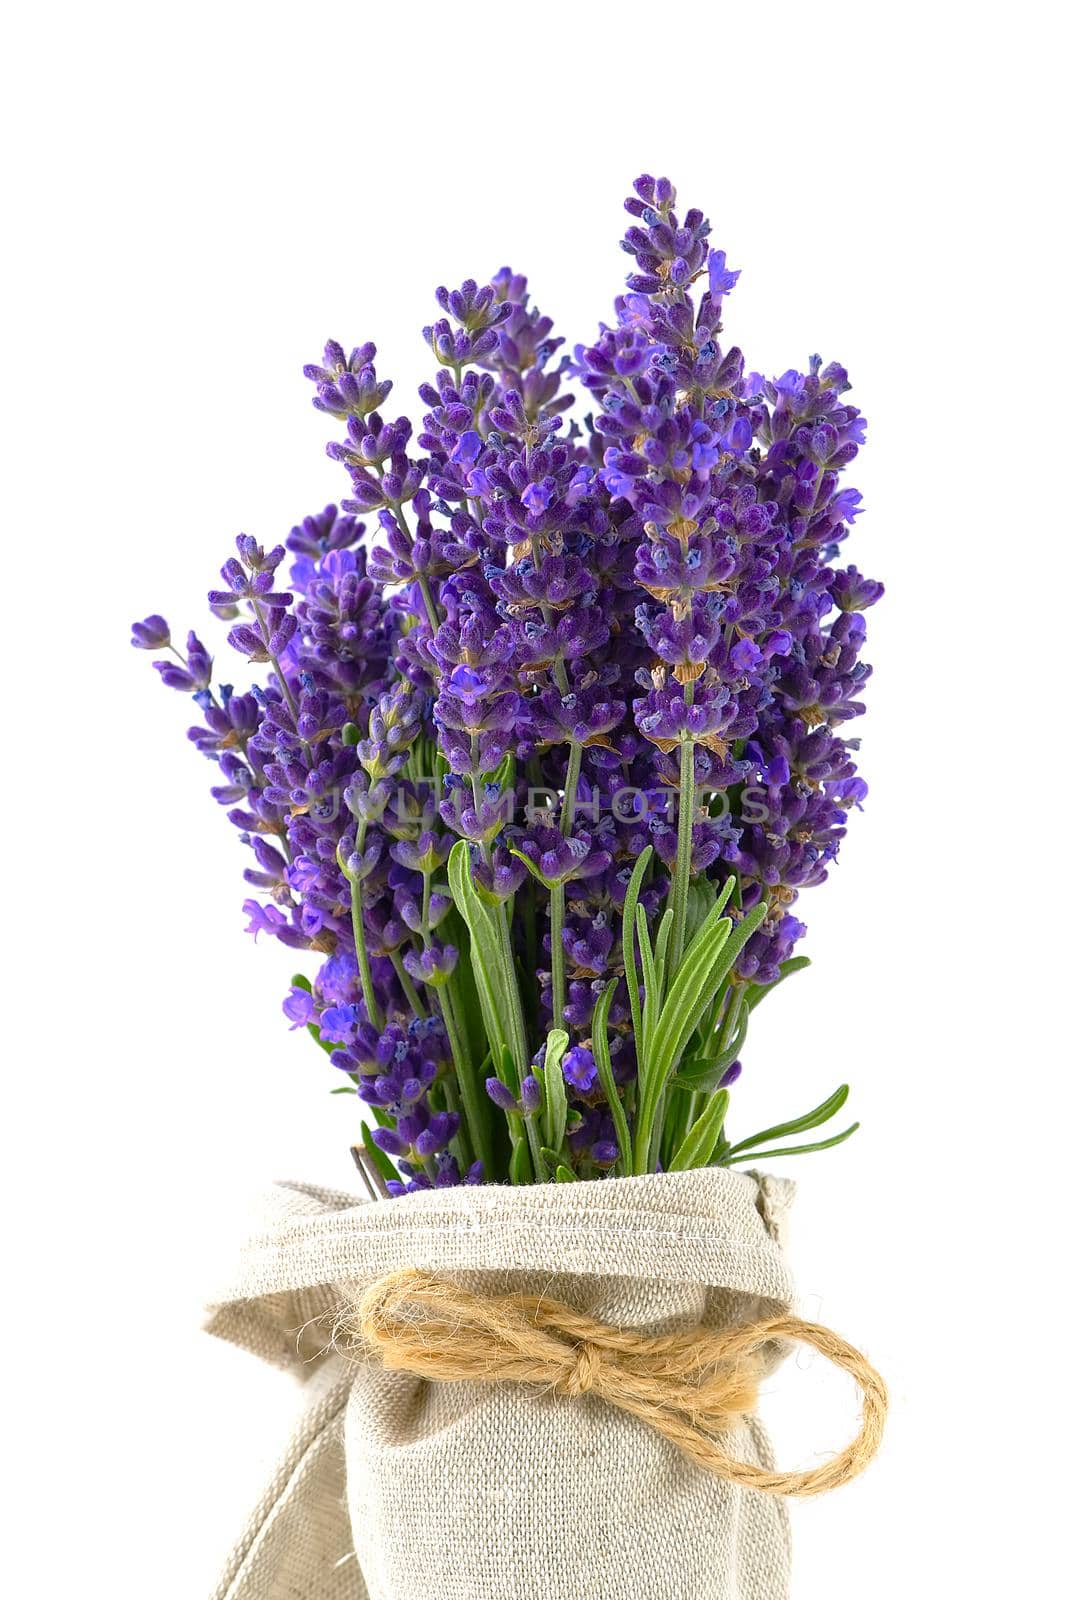 Aromatic Lavender flowers bundle on a white background. Isolated morning Lavender flowers by PhotoTime